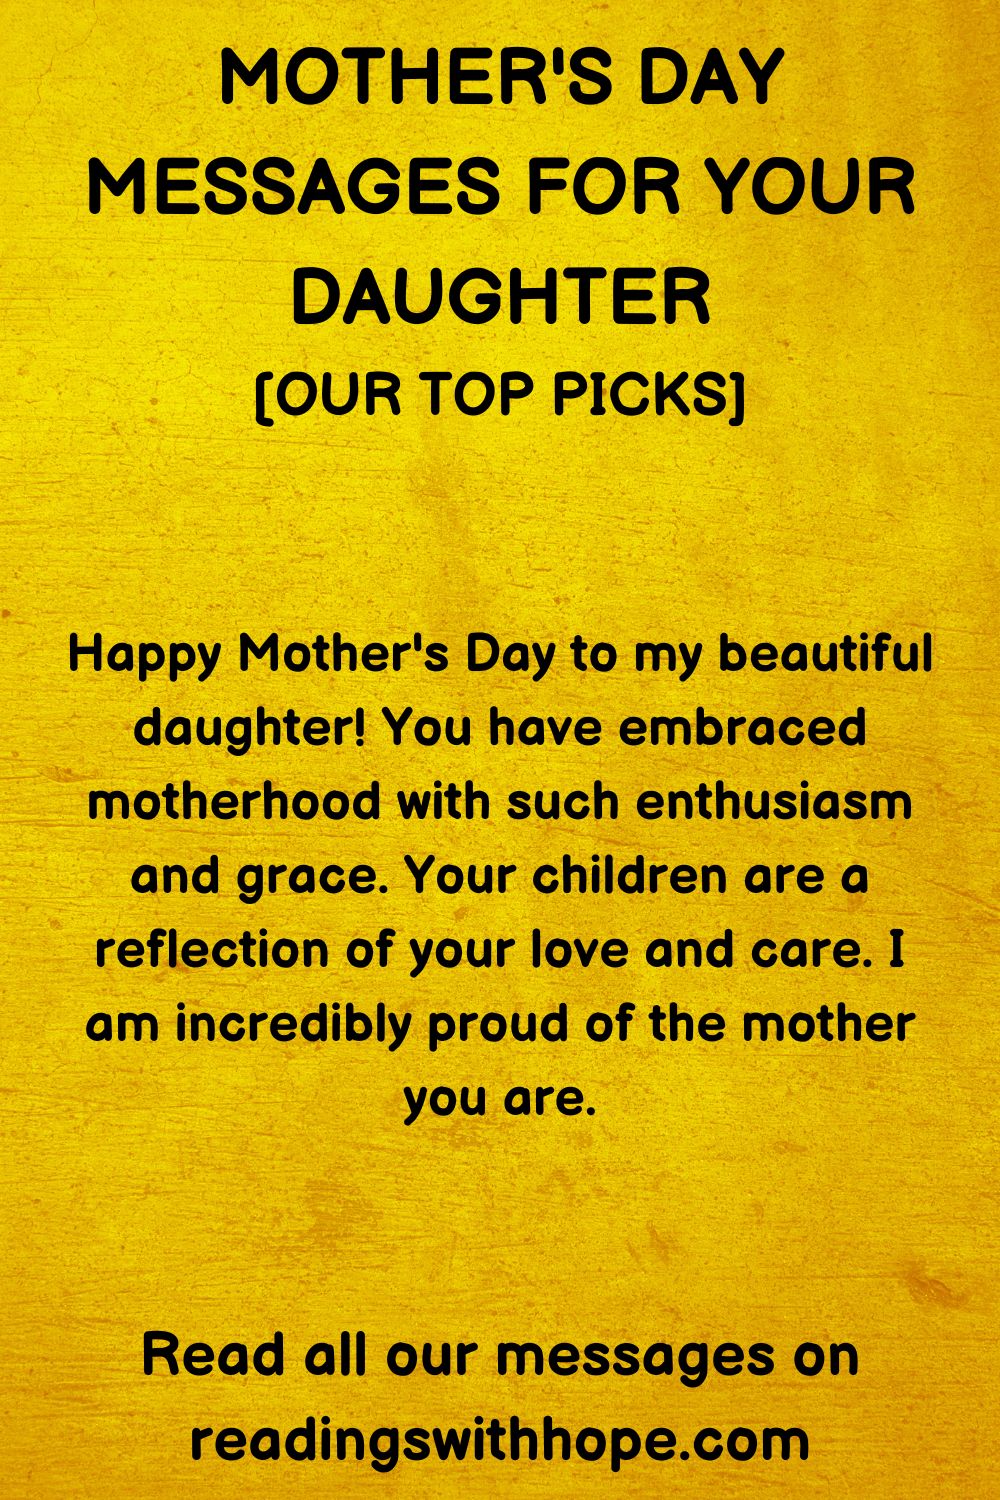 45 Mother's Day Messages For Your Daughter